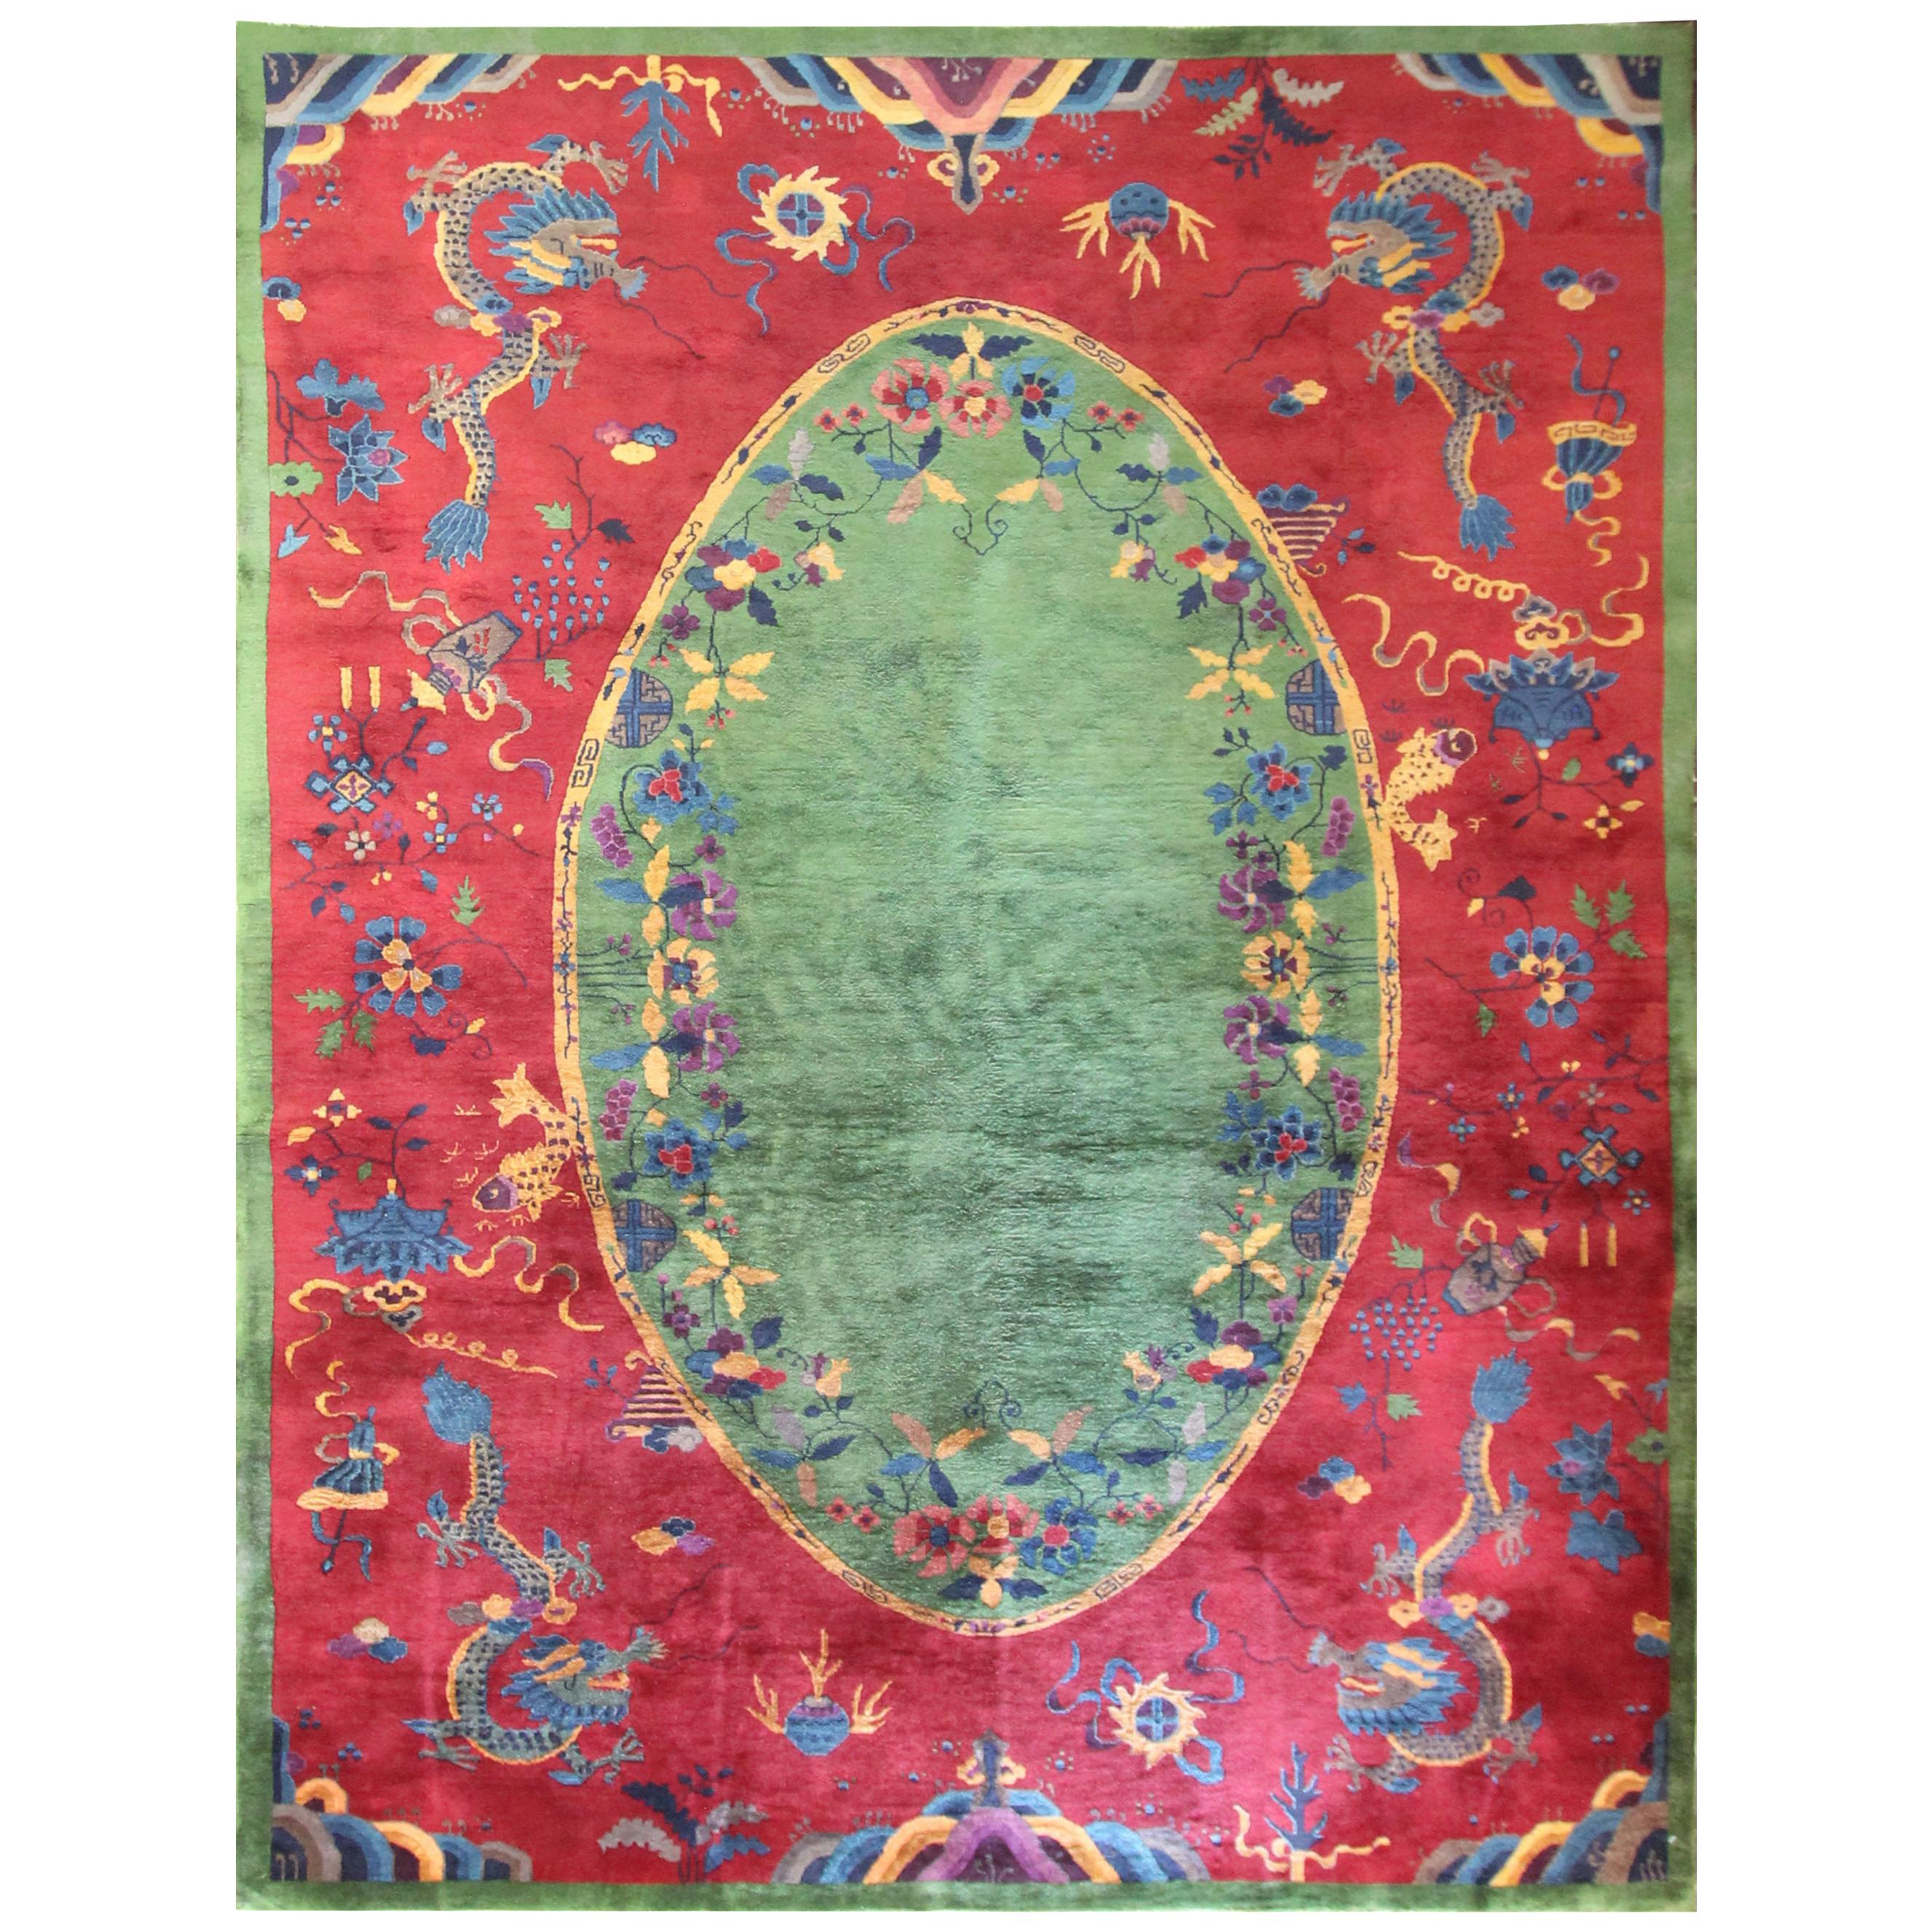 Antique Dragon Art Deco Chinese Carpet, Early 20th Century, 8'9" x 11'6" For Sale